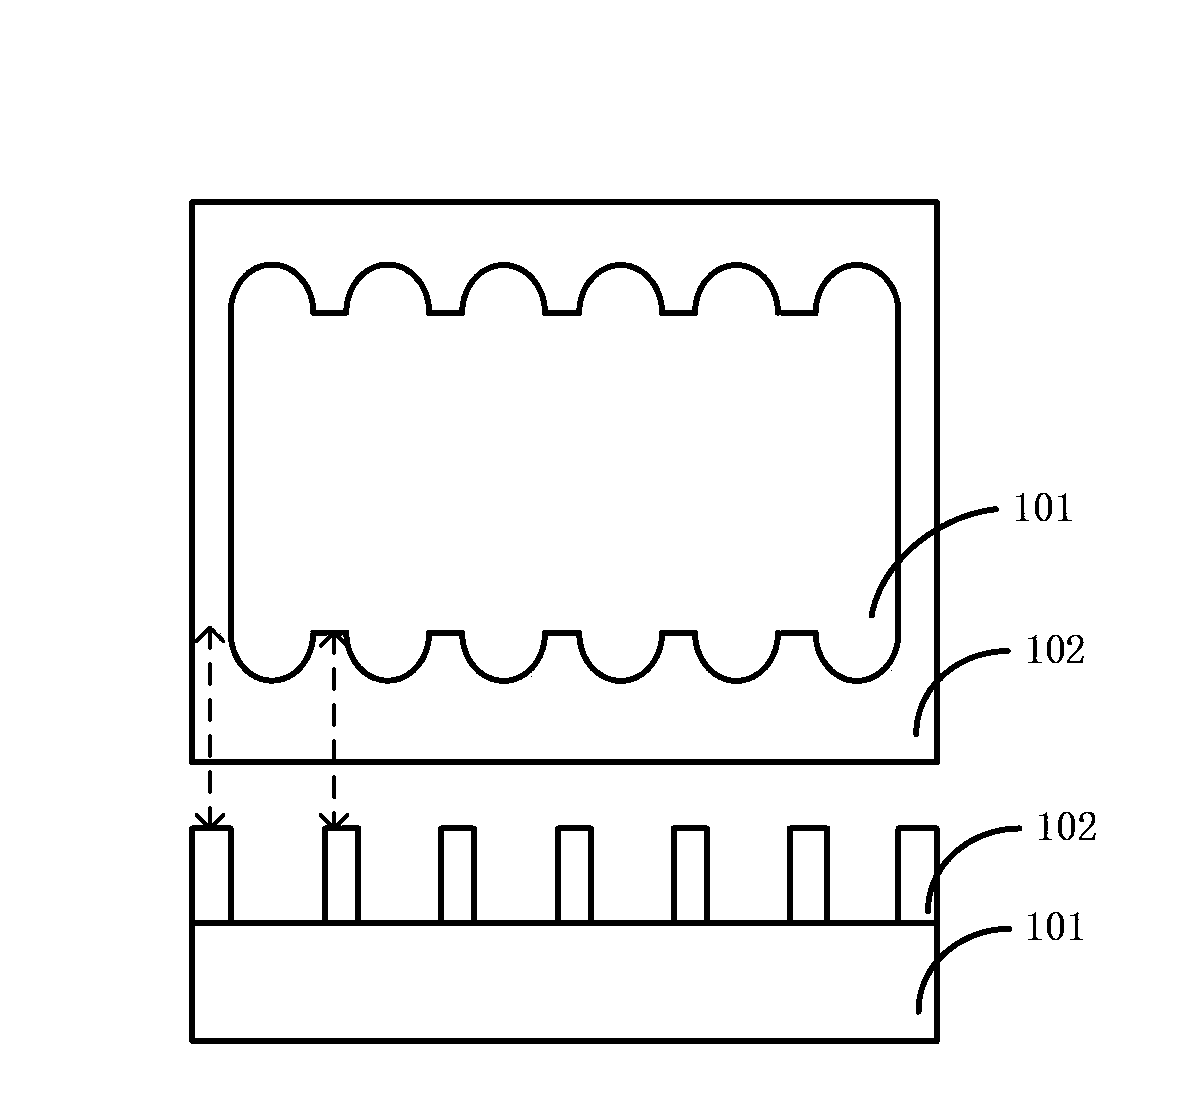 Semiconductor device manufacturing method based on self-aligned double patterning